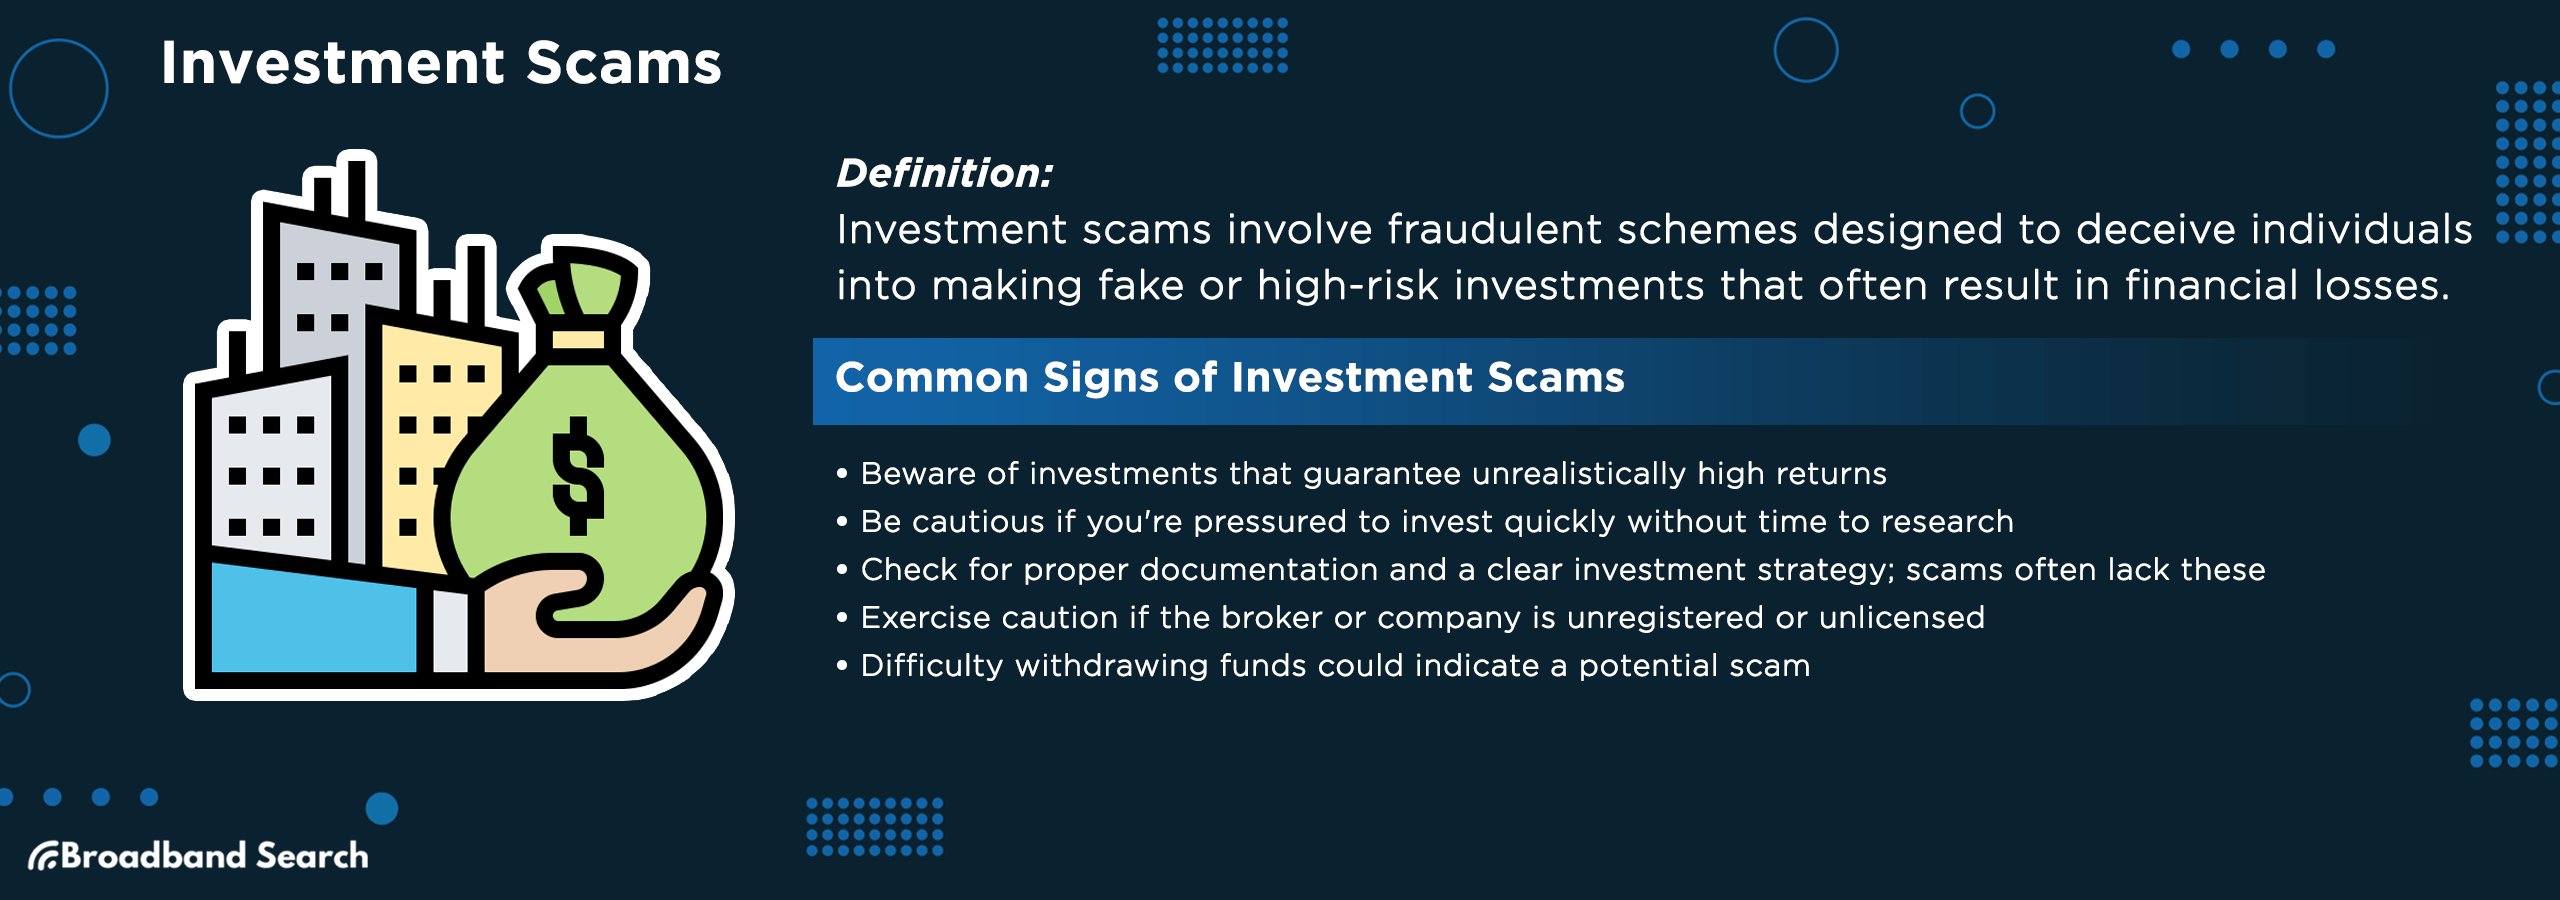 Definition and signs of investment scams